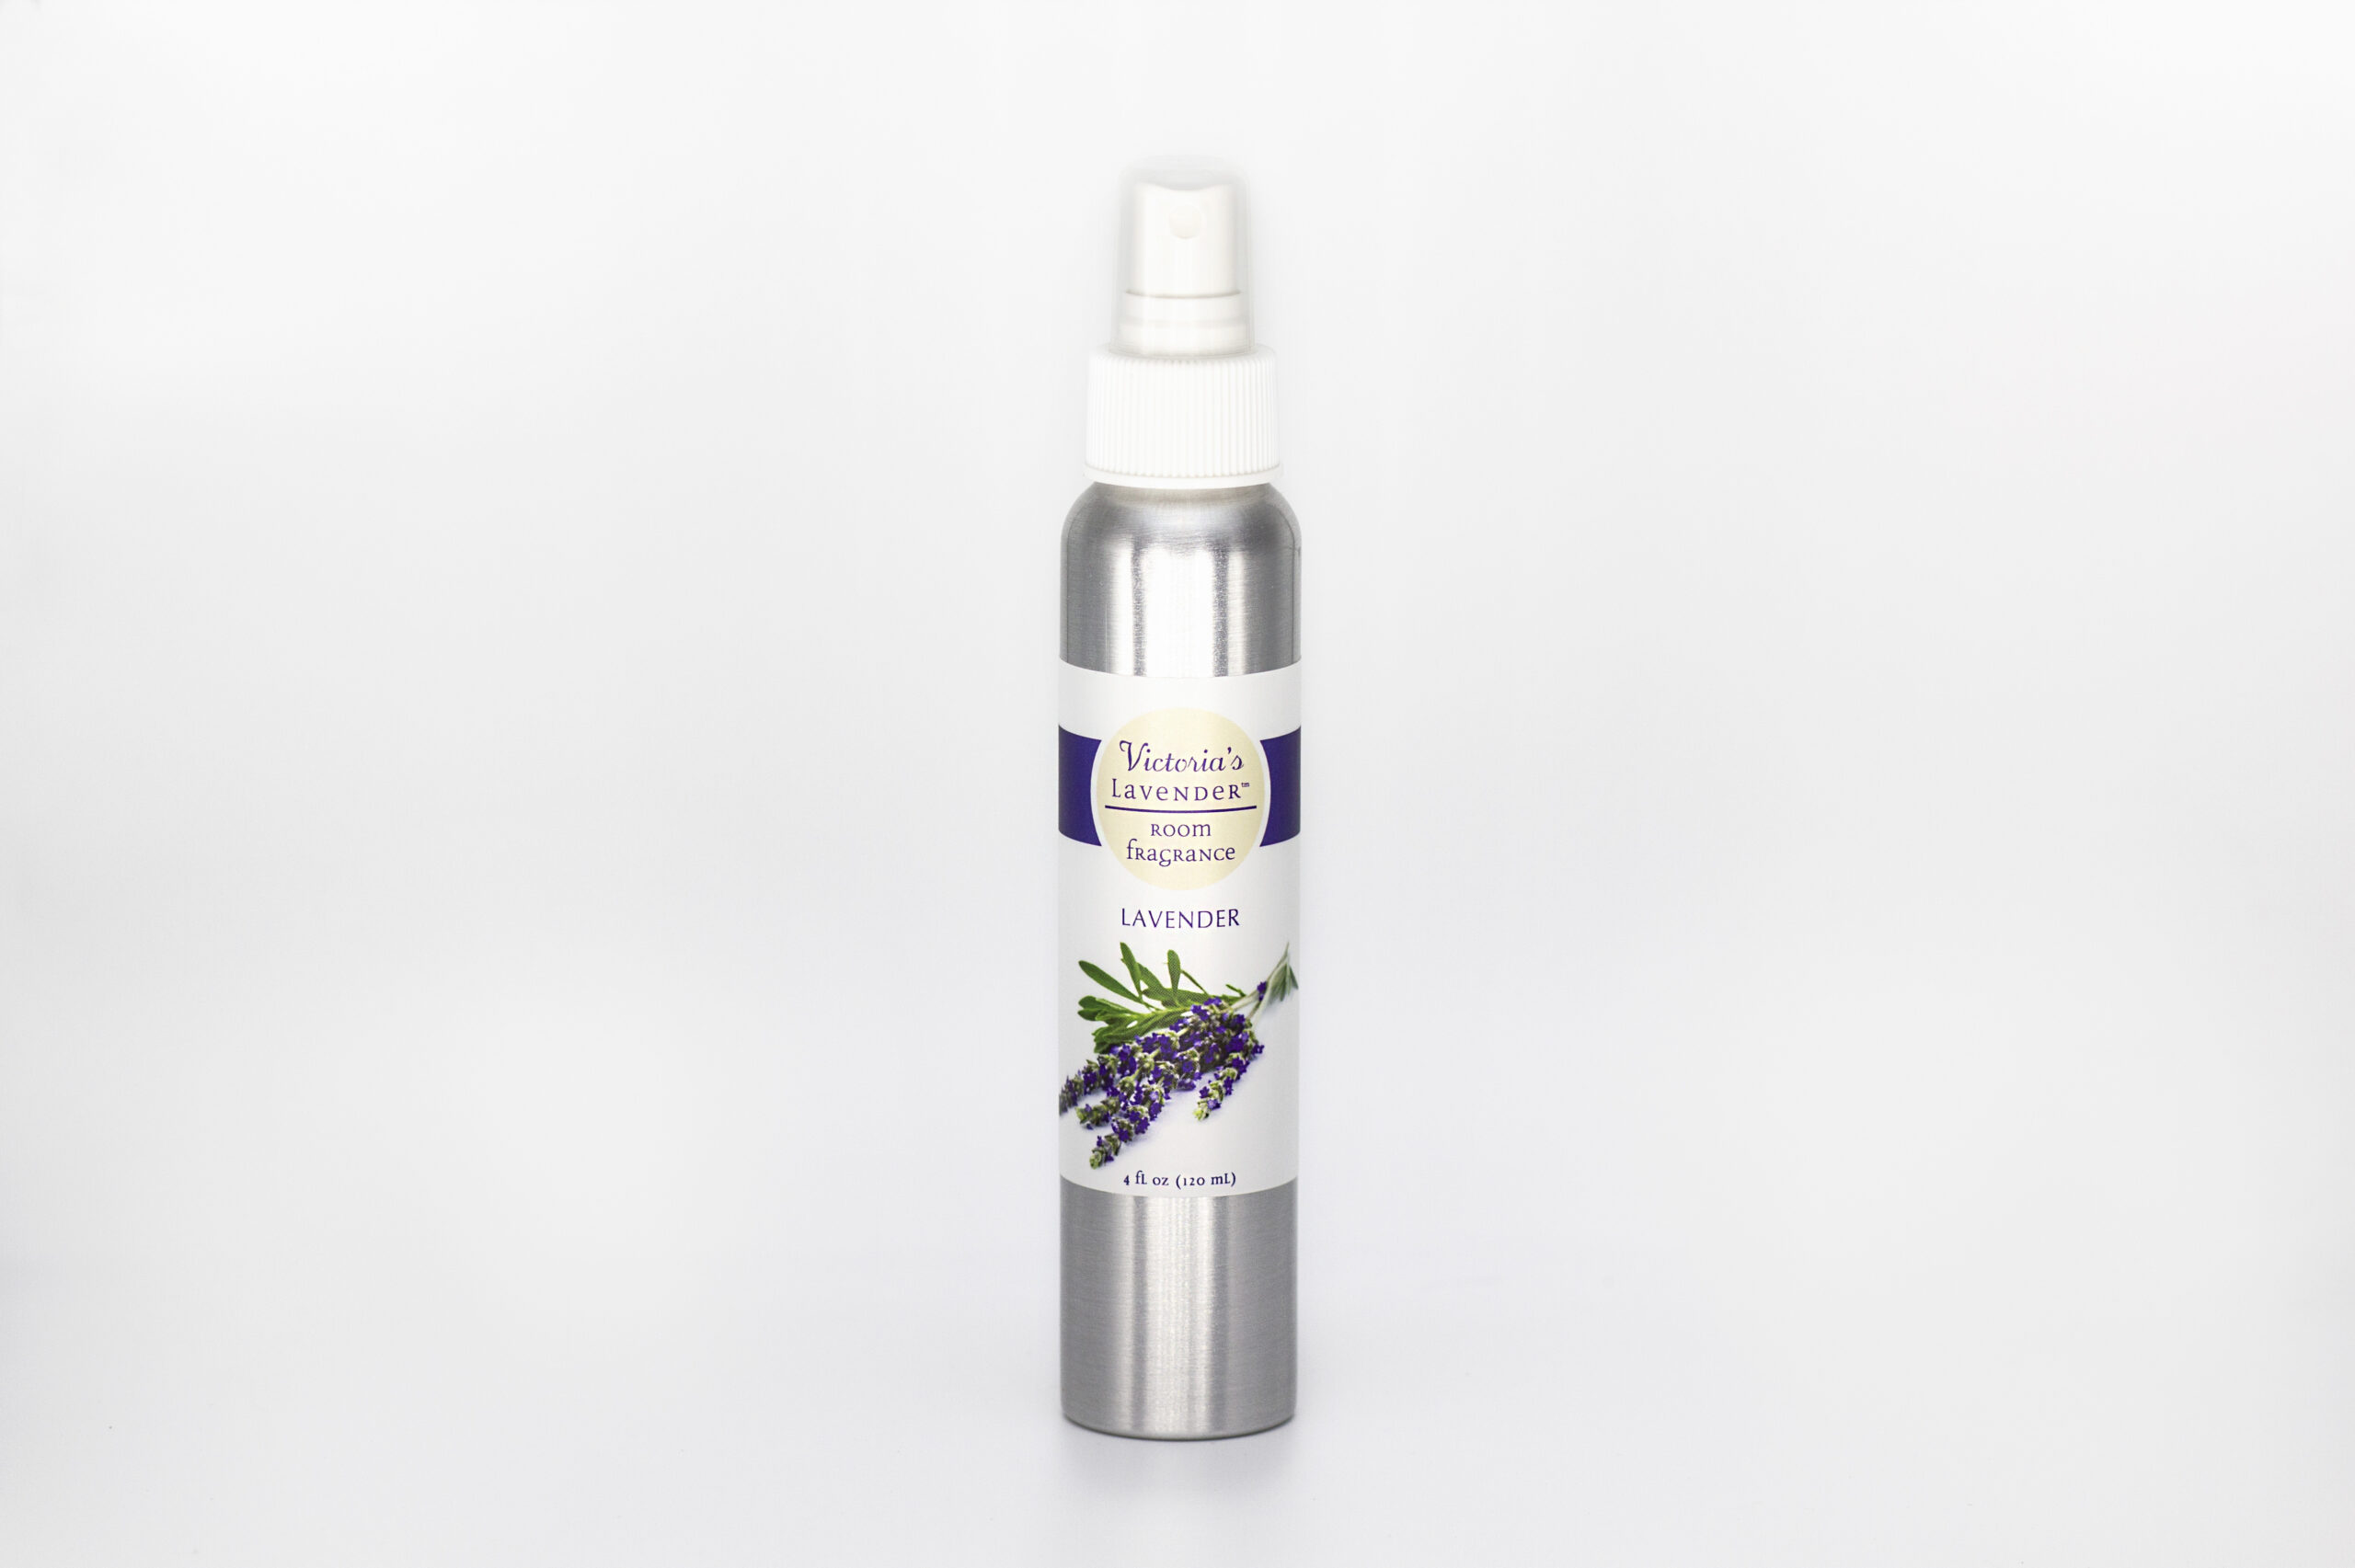 Lavender Sleep Therapy Pillow mist - Goddess Of Spring